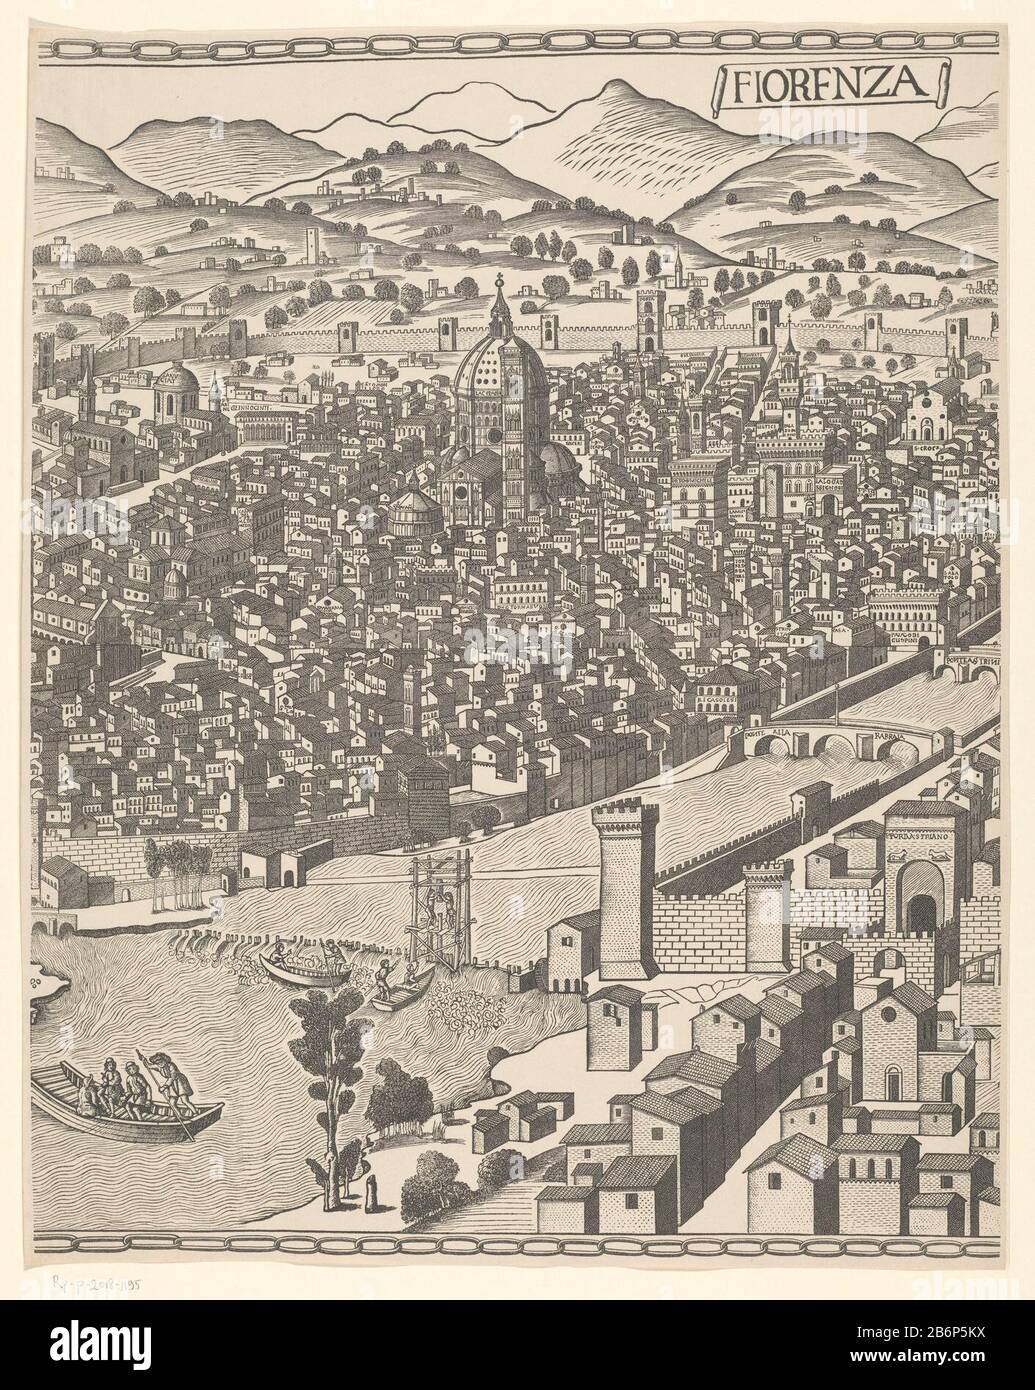 Gezicht op Florence (middelste deel) Fiorenza (titel op object) Midsection of a view of Florence, in three parts, called the Pianta della Catena genoemd. Manufacturer : printmaker Francesco Rosselli (copy to) printer: Reichsdruckerei (listed property) Place manufacture: printmaker: Florence Publisher: Berlin Dated: approximately 1480 and / or 1879 - 1949 Material: paper Technique: cliché Dimensions: sheet: h 574 mm × W 462 mm Subject: prospect of city, town panorama, silhouette of city where Florence Stock Photo